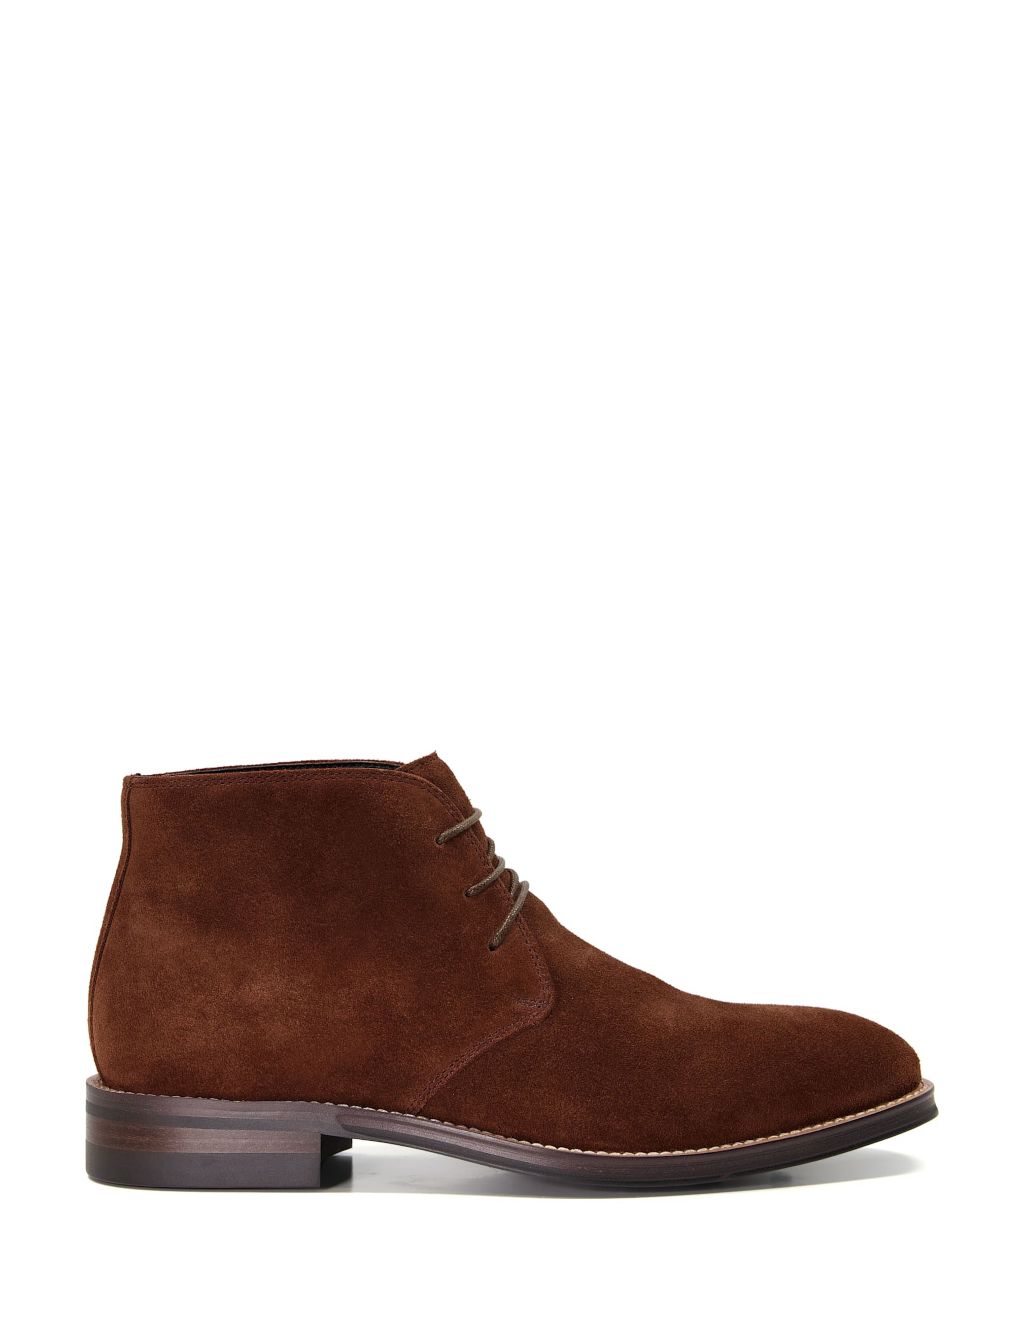 Suede Chukka Boots image 1